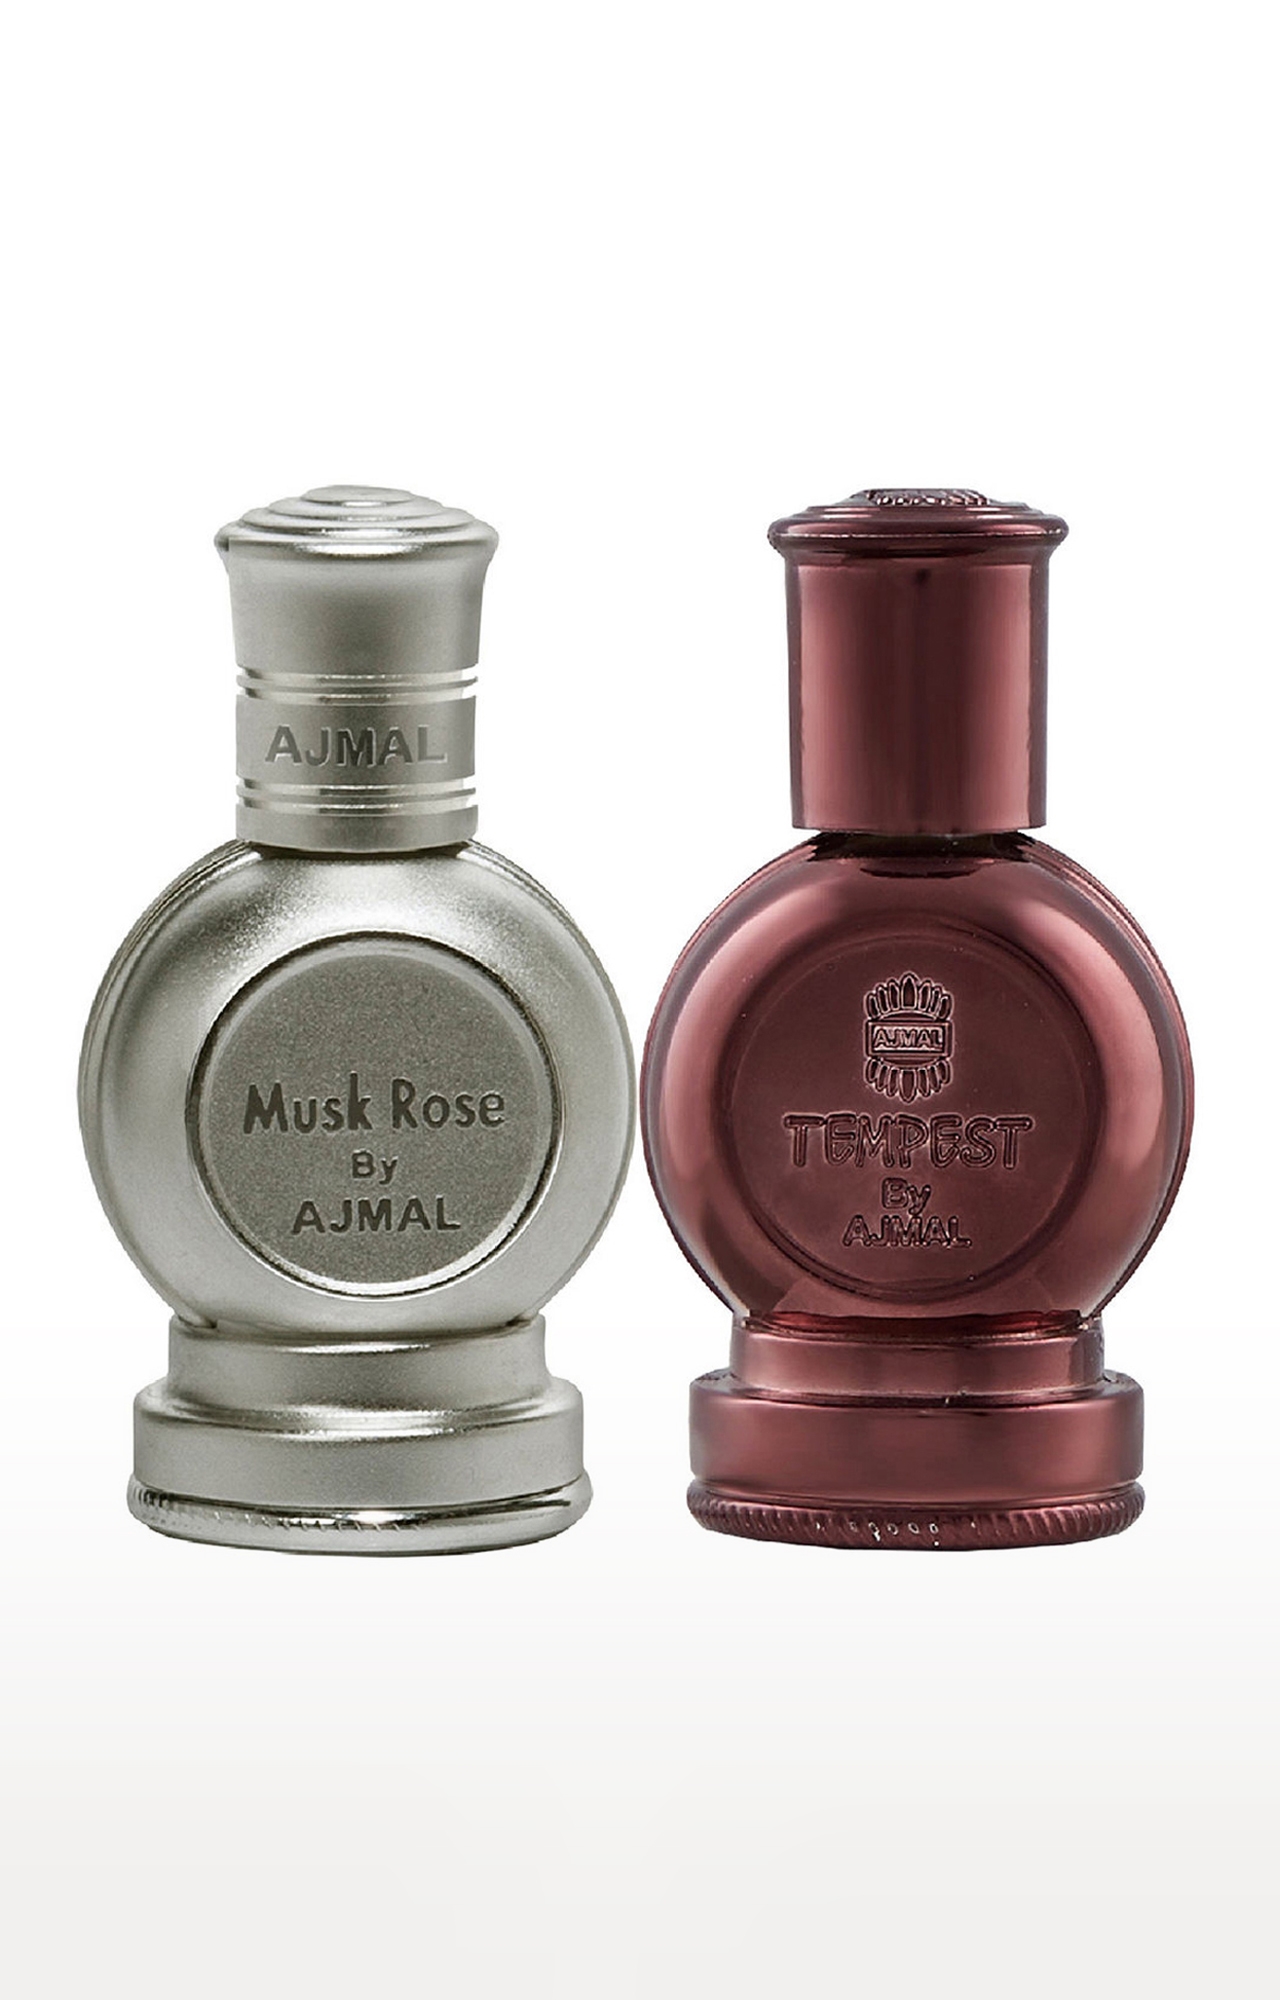 Ajmal Musk Rose Concentrated Perfume Oil Musky Alcohol-free Attar 12ml for Unisex and Tempest Concentrated Perfume Oil Alcohol-free Attar 12ml for Unisex